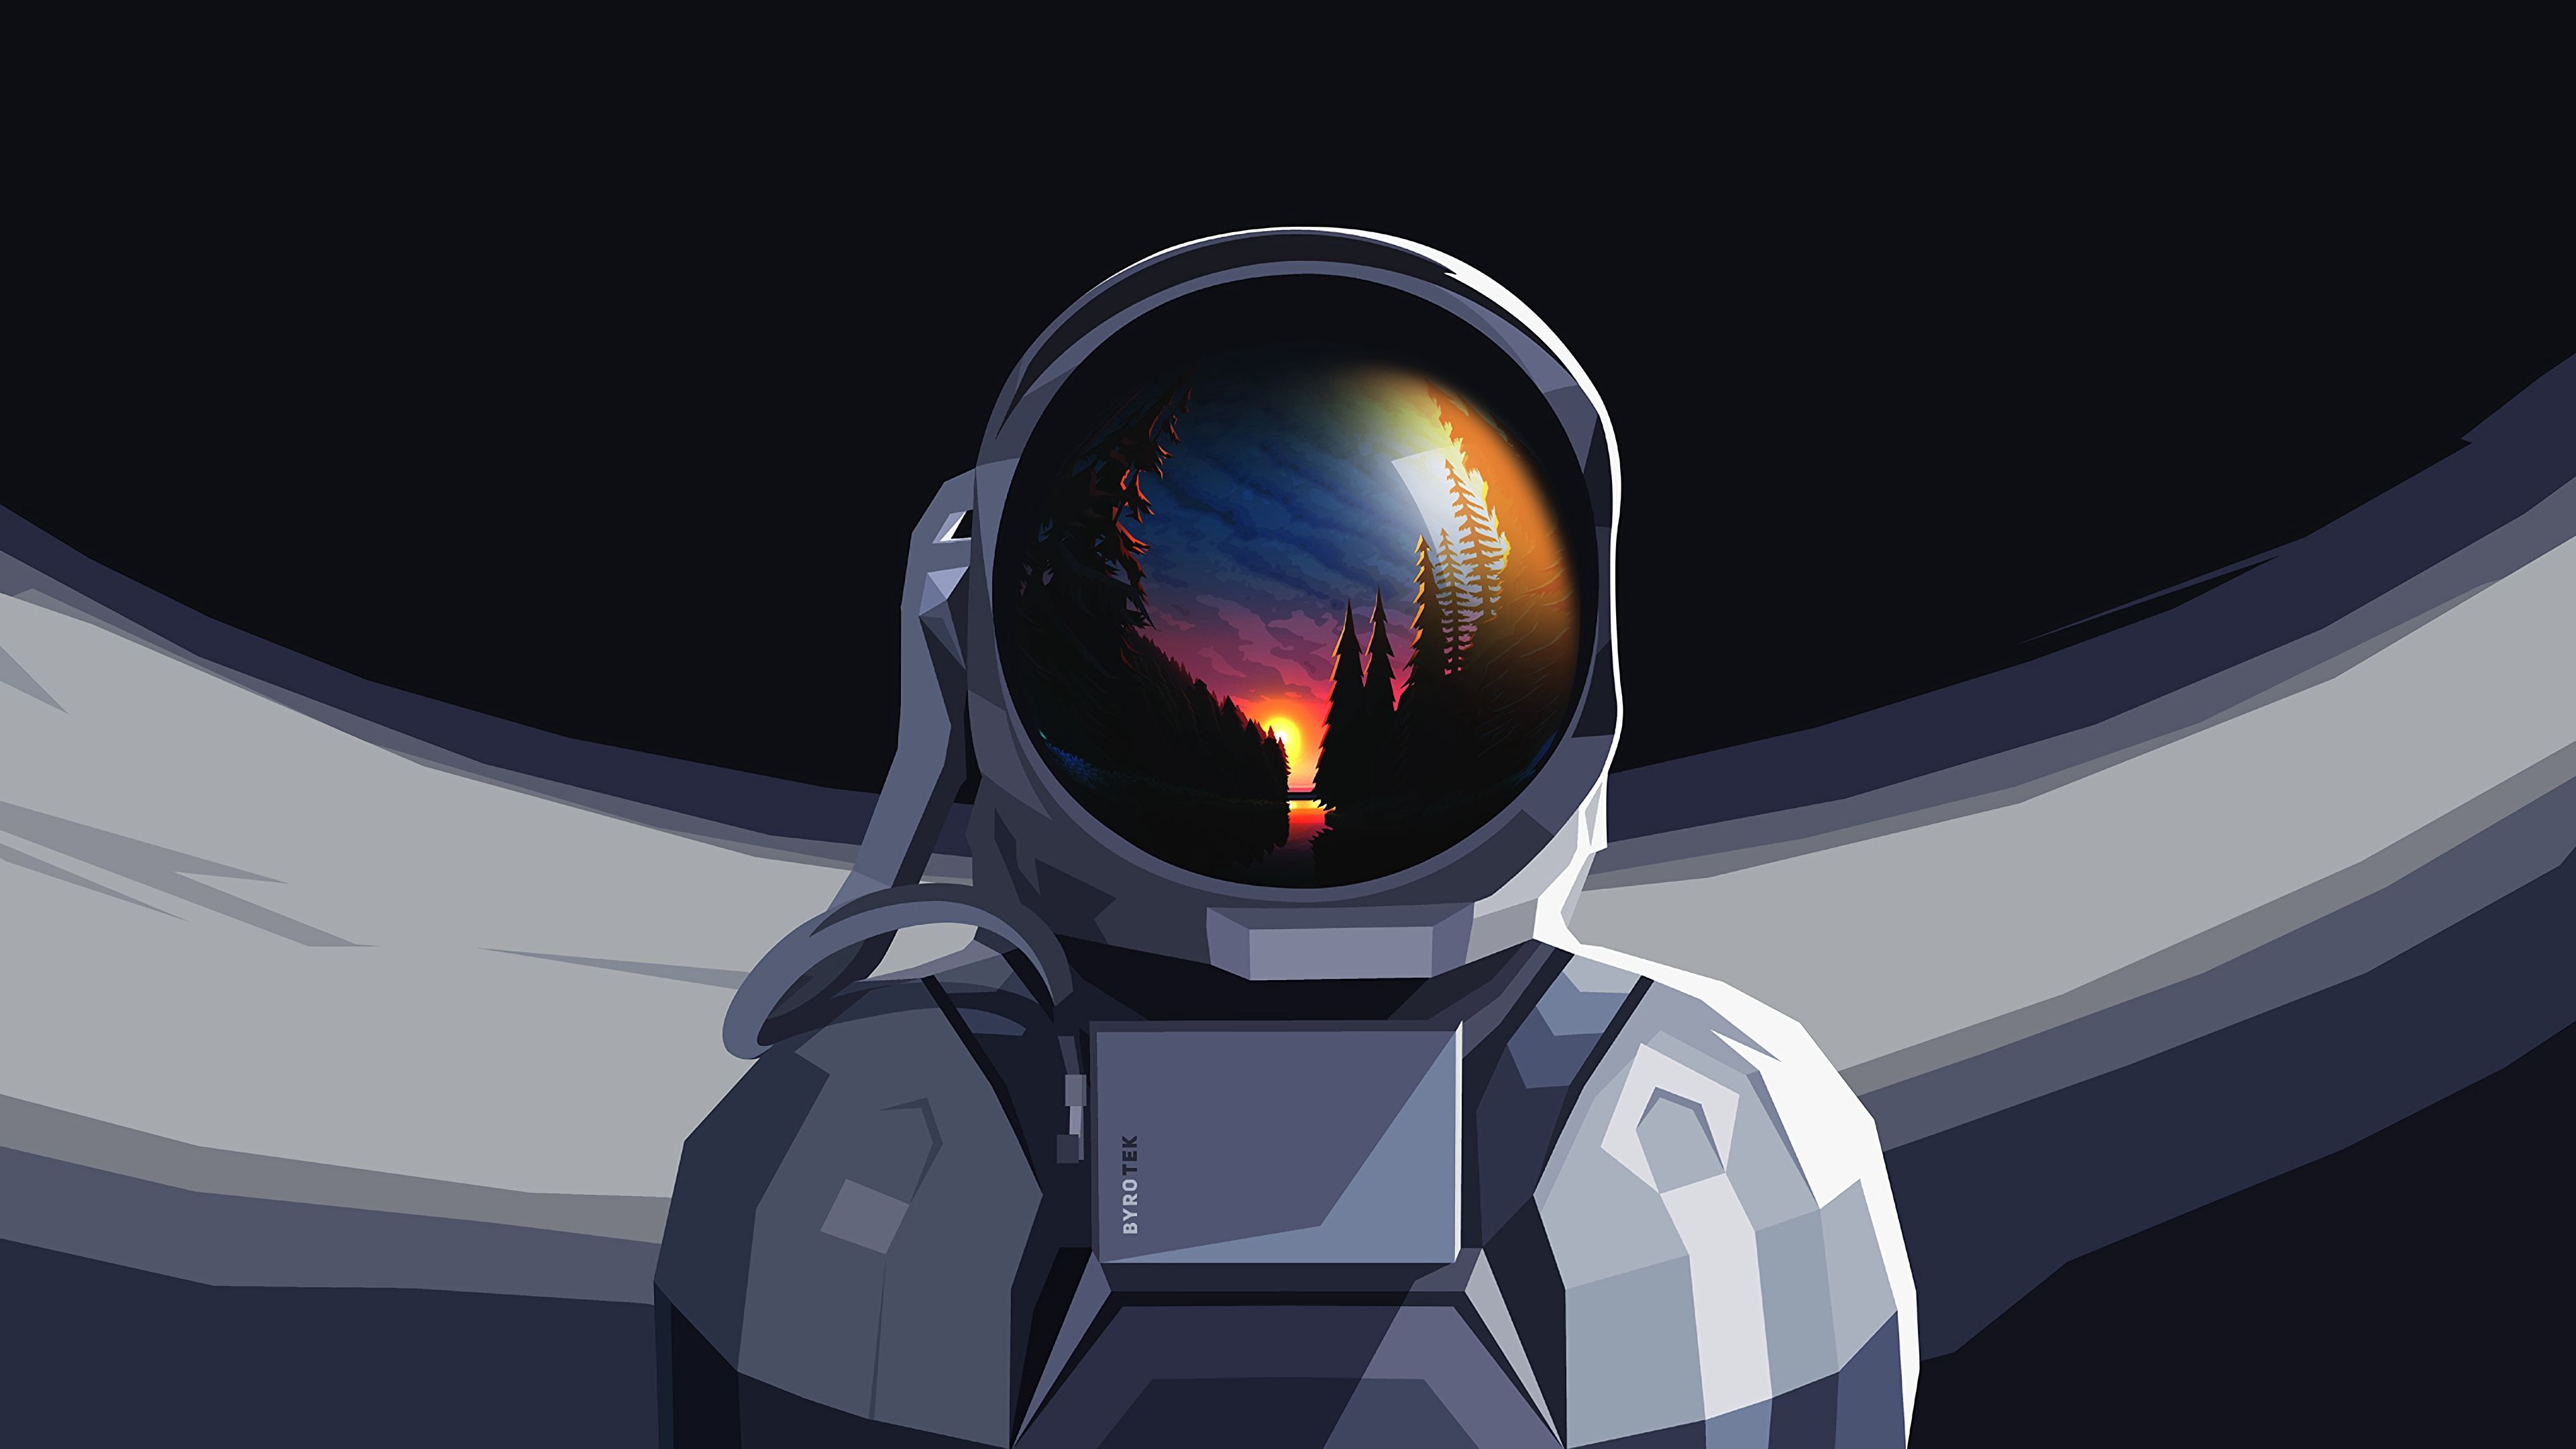 Spacesuit 4K wallpaper for your desktop or mobile screen free and easy to download